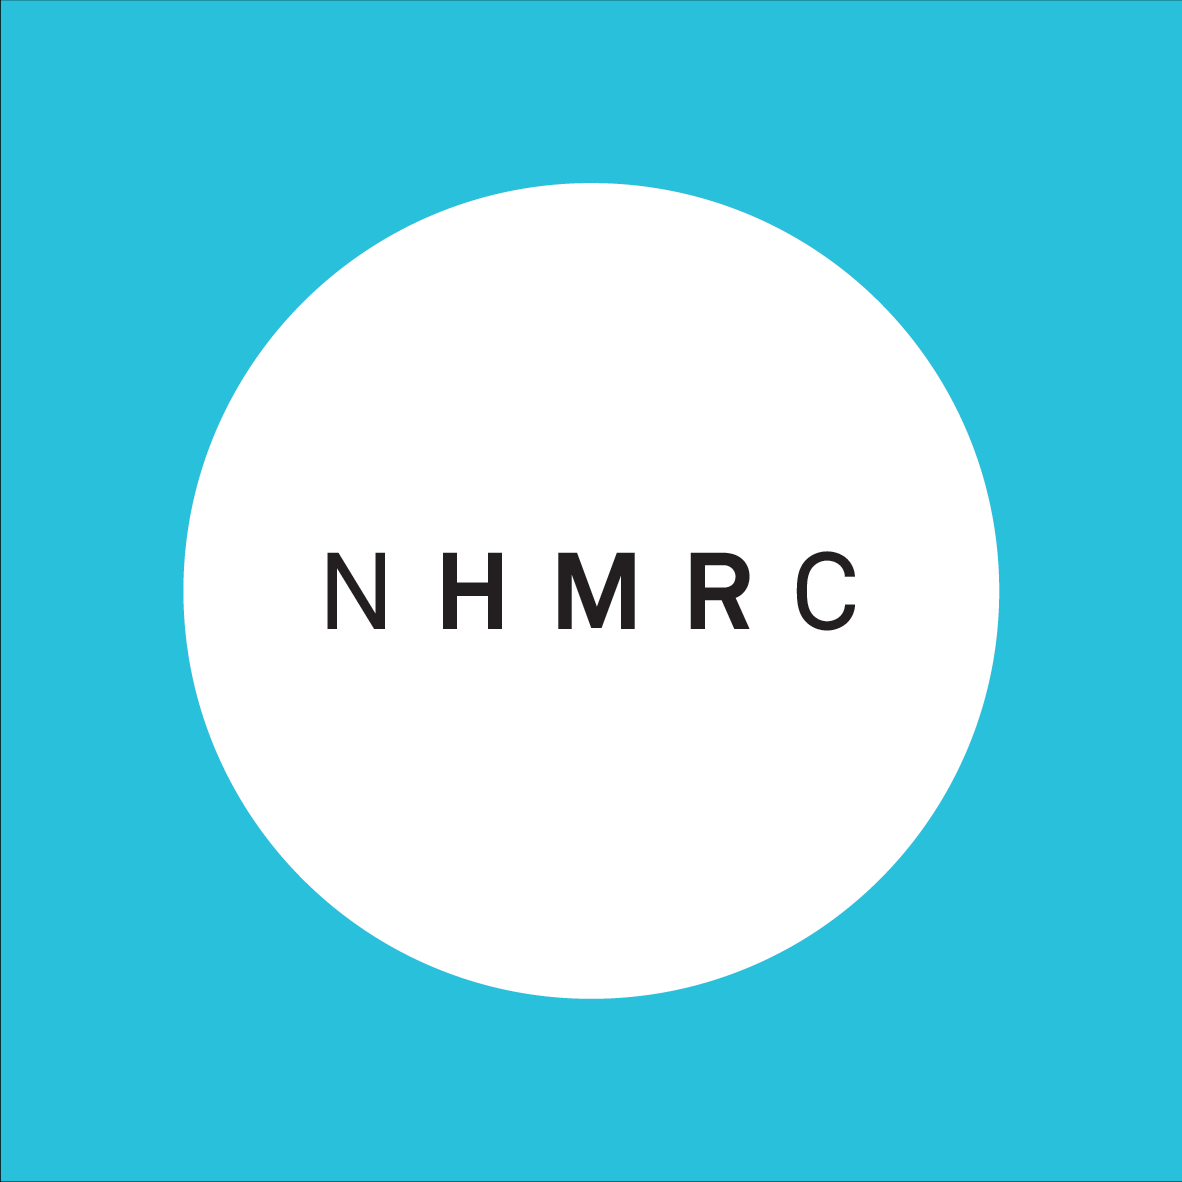 NHMRC Clinical Practice Guidelines Portal logo